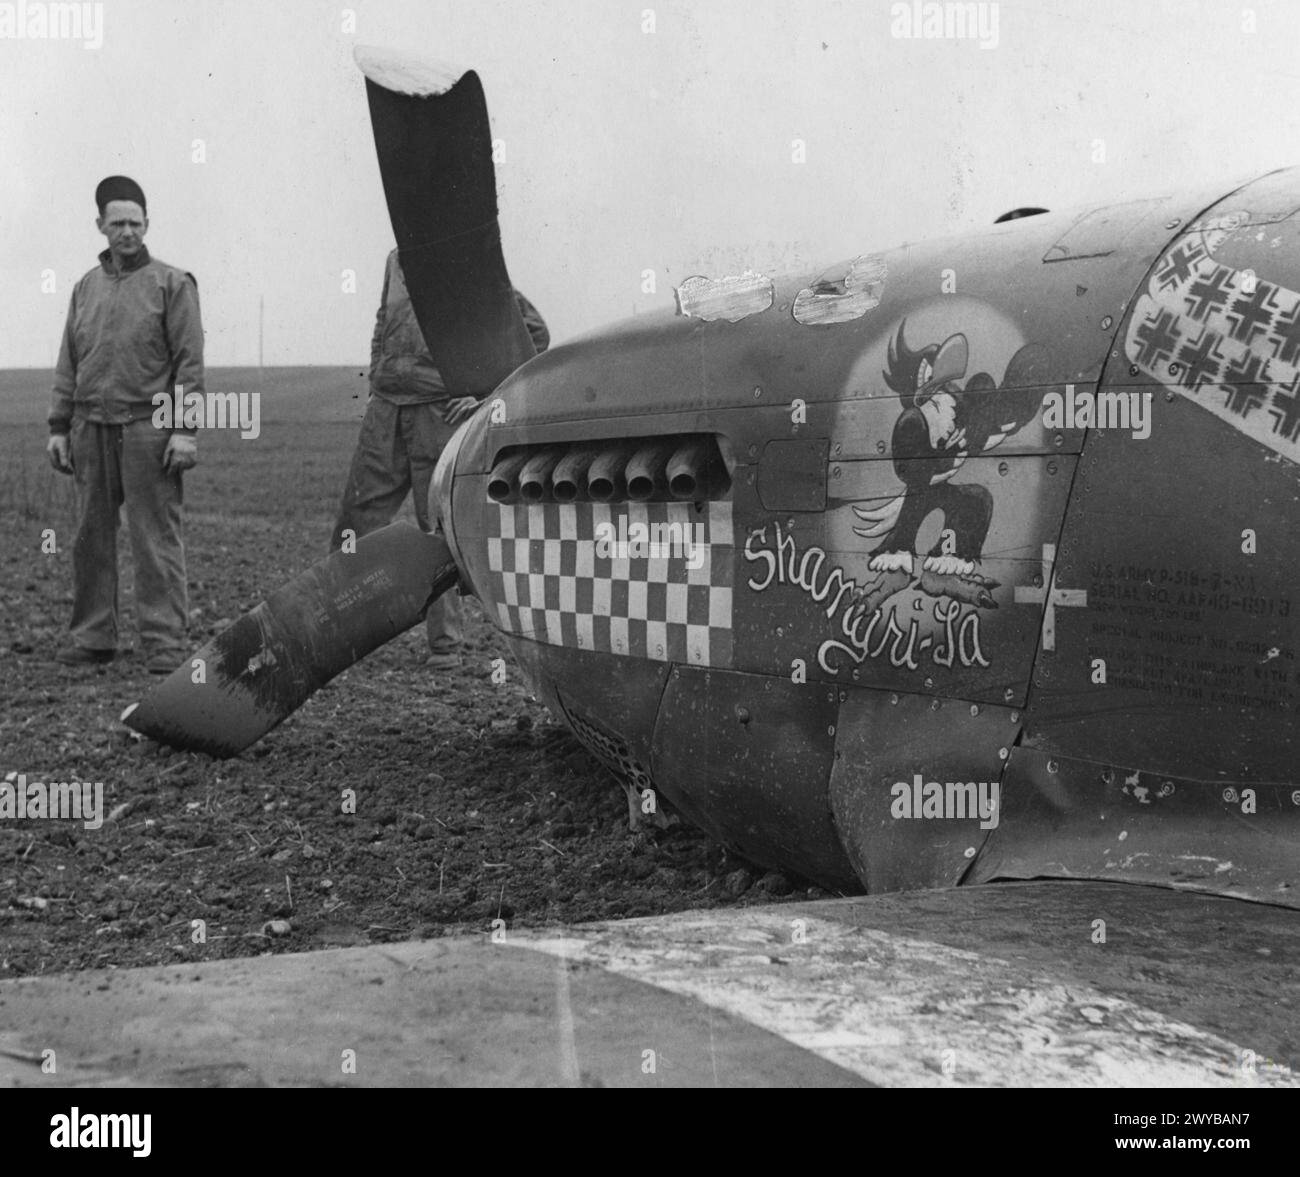 UNITED STATES EIGHTH AIR FORCE IN BRITAIN, 1942-1945 - Capt. Don Gentile's P-51B Mustang 'Shangri-La' after crash landing on 13 April 1944 as Gentile arrived back at the 4th Fighter Group's Debden air base after his last mission.Printed caption attached to print:'Captain Gentile crashes after big raid over continent, 14.4.44'And: 'Captain Don S. Gentile, 23-year-old flight leader in a U.S. 8th Air Force Mustang Group, who now is the top-scoring American ace in the European Theatre, crash-landed yesterday April 13th [date censored] after taking part in the big raid. Not known yet whether he bro Stock Photo